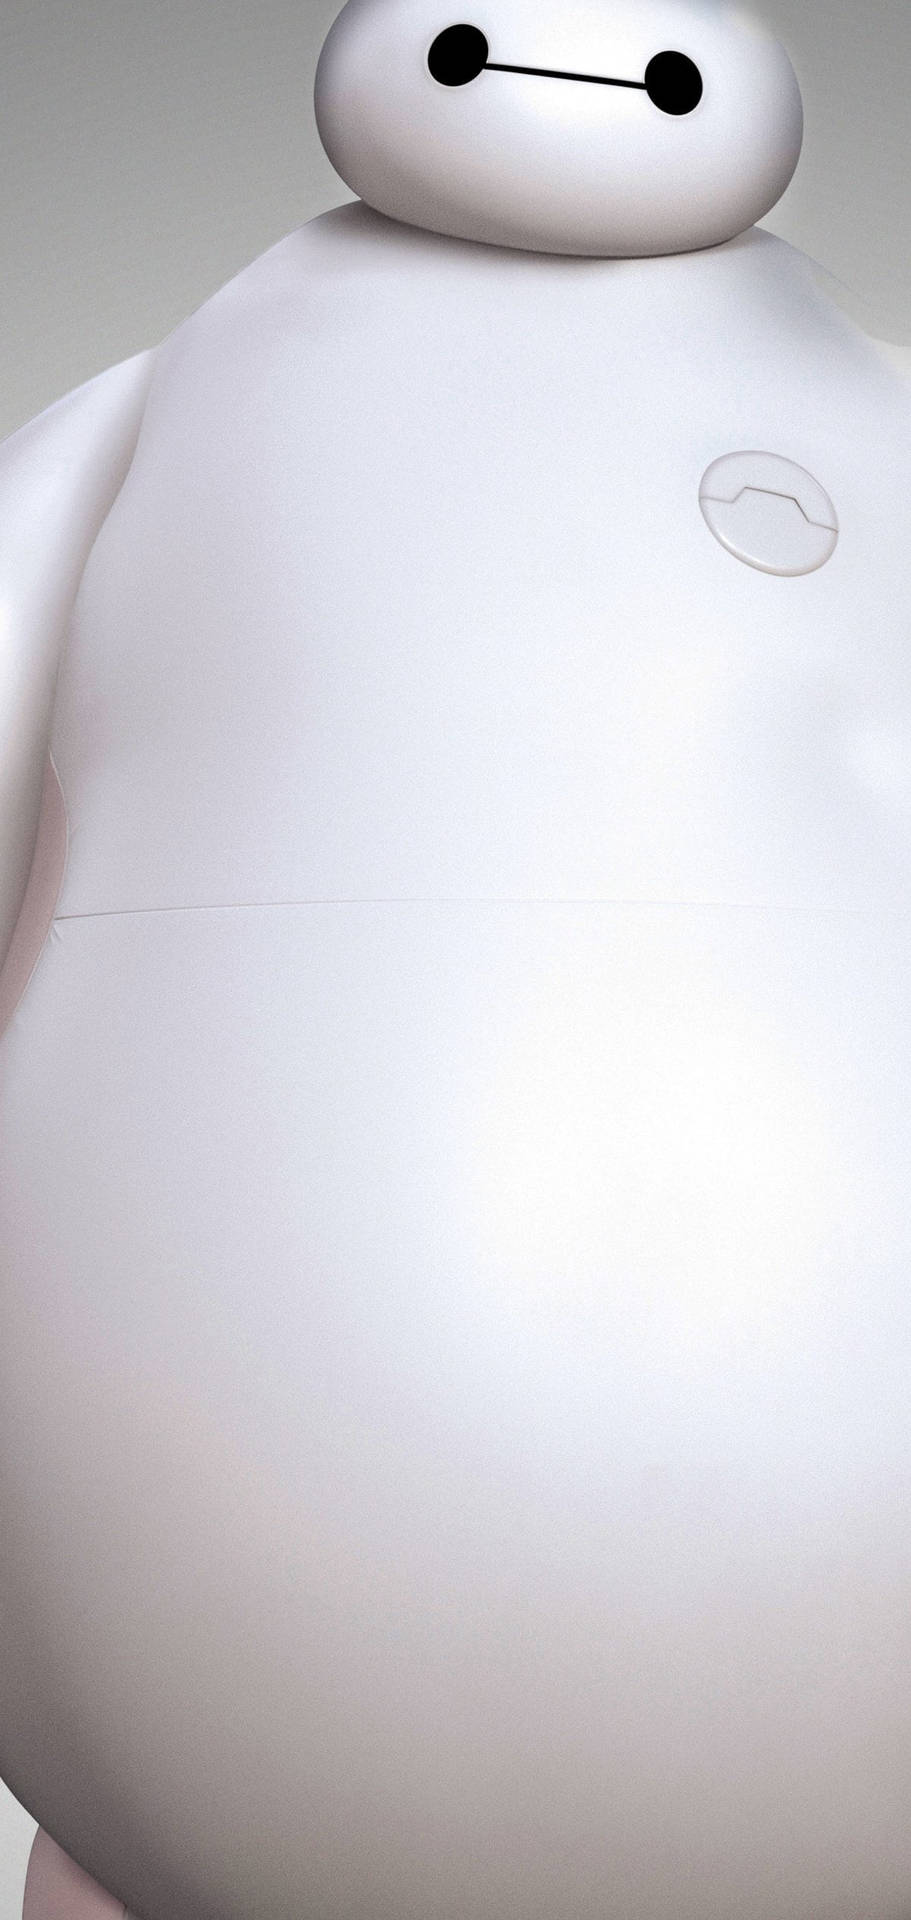 Baymax Middle Punch Hole Wallpaper